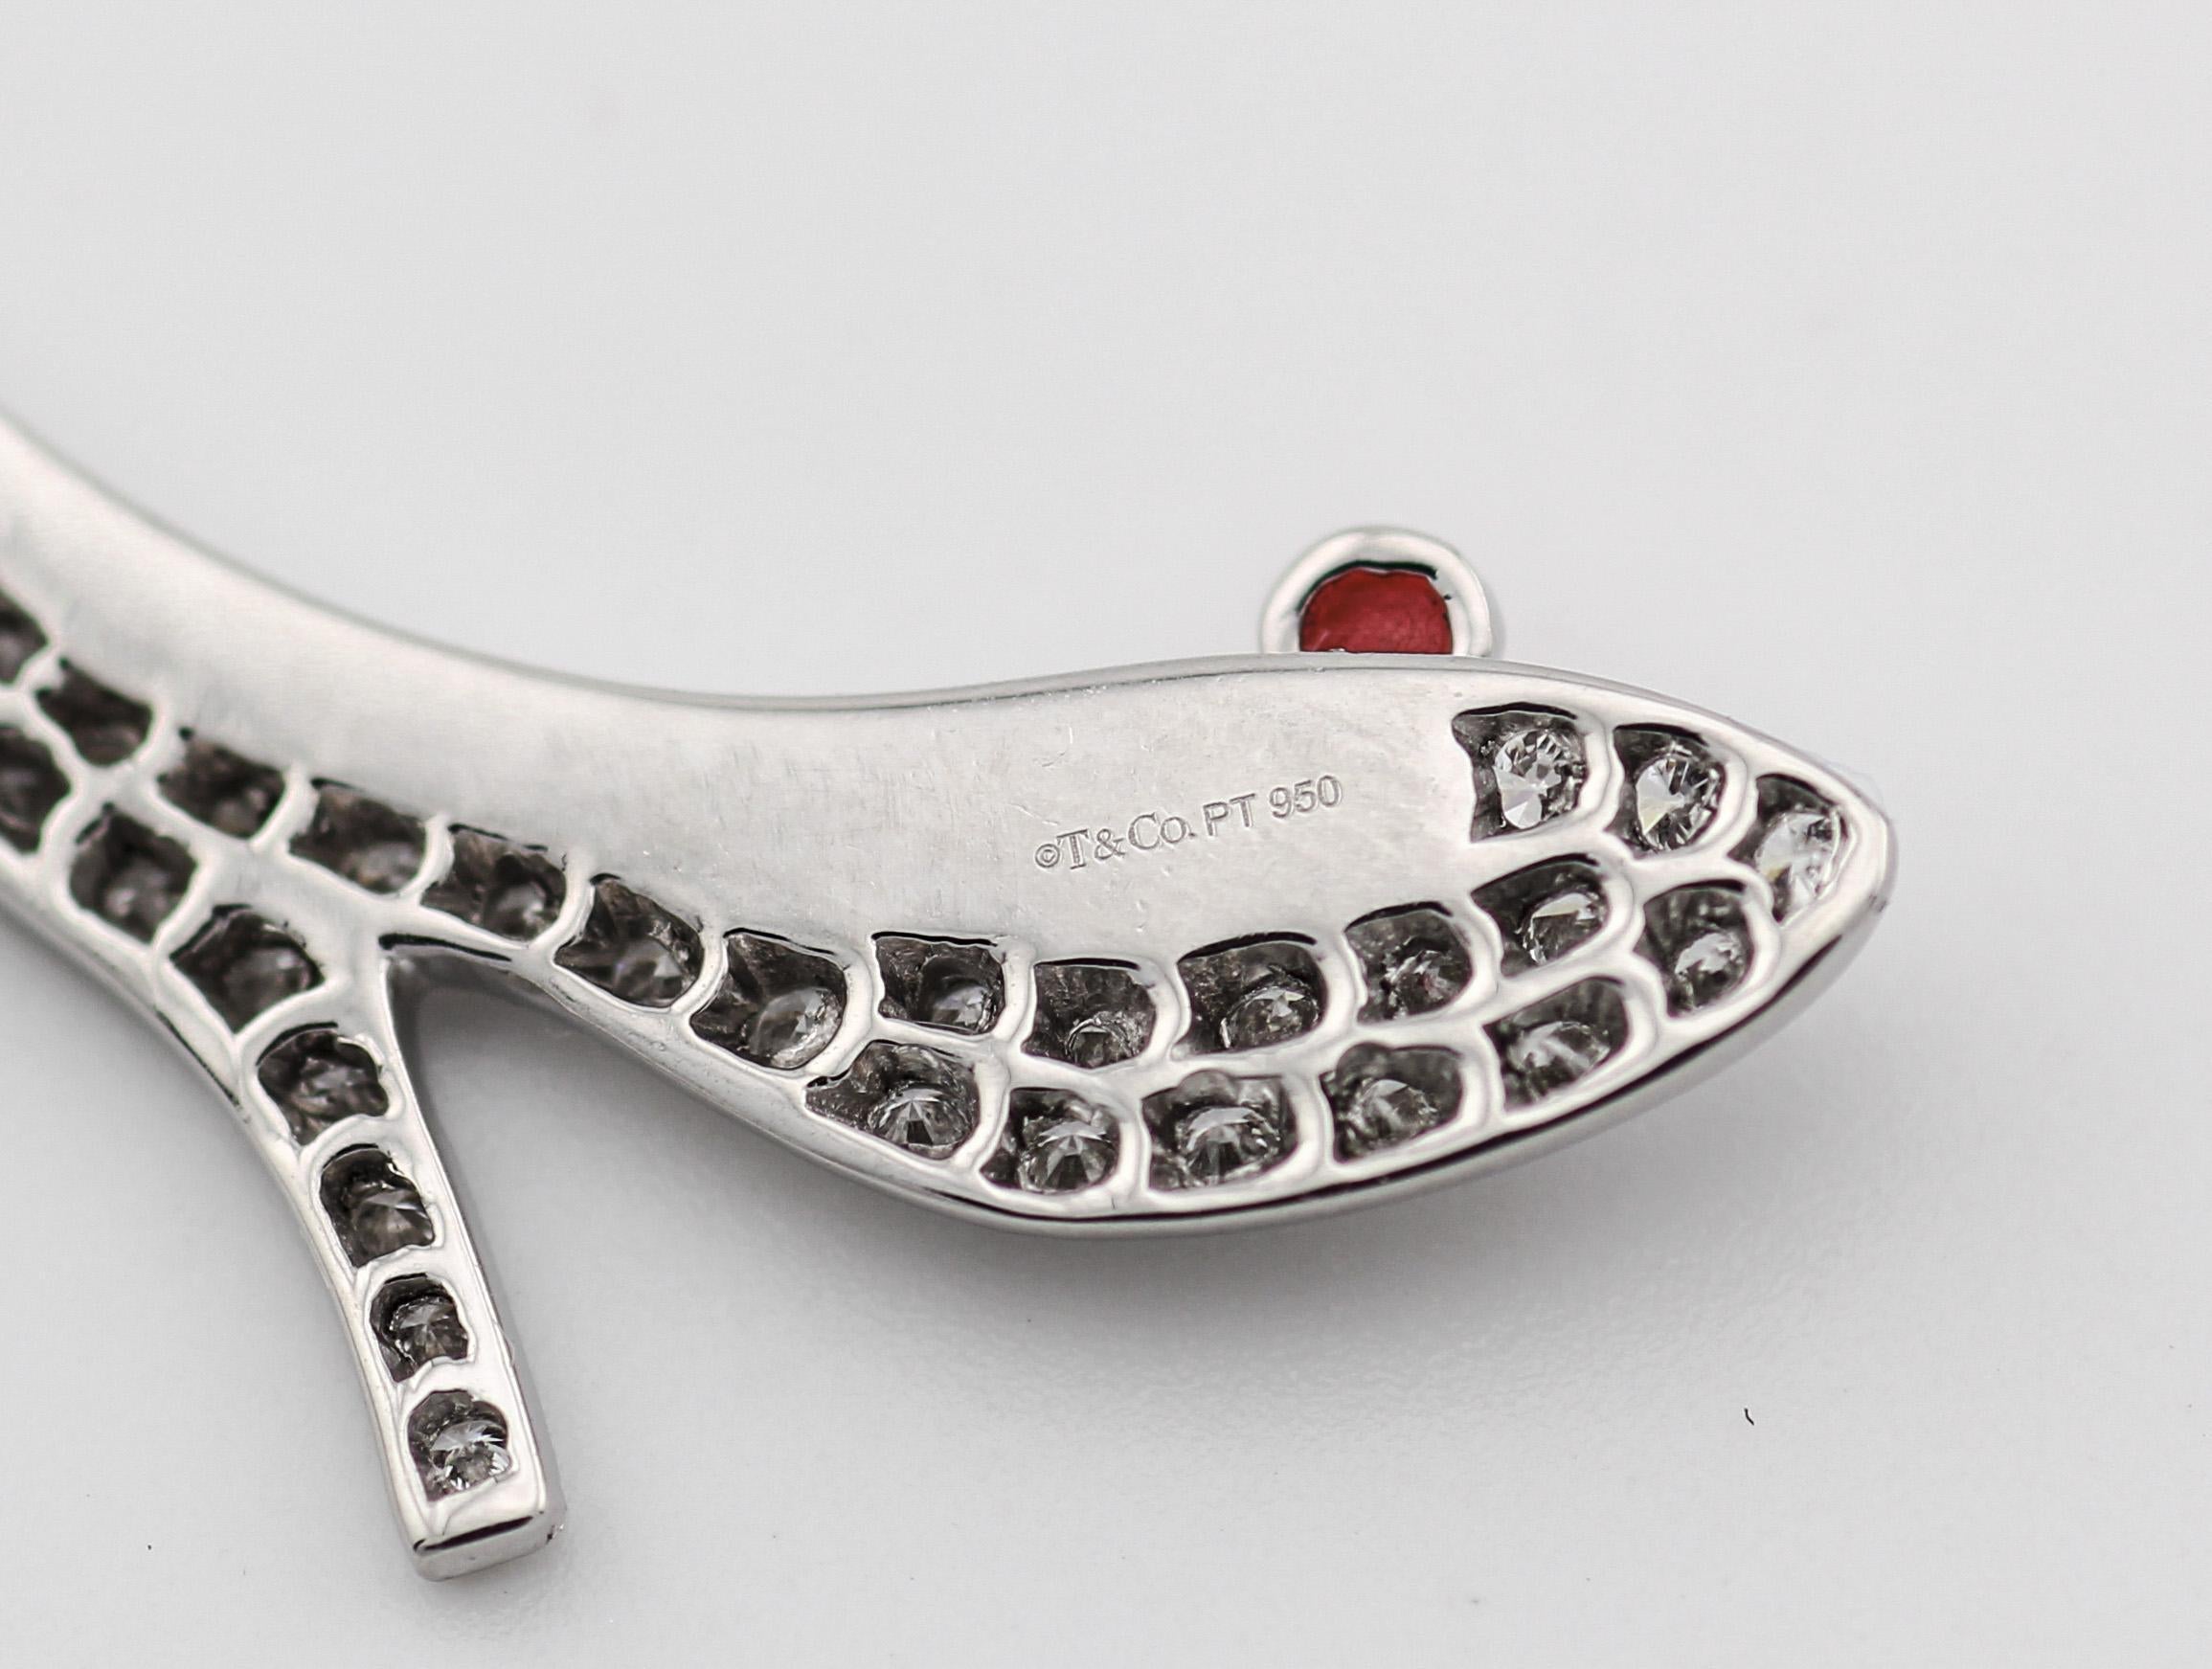 Tiffany & Co. Diamond Red Enamel Platinum 18K Heel Shoe Charm Pendant Necklace In Good Condition For Sale In Bellmore, NY